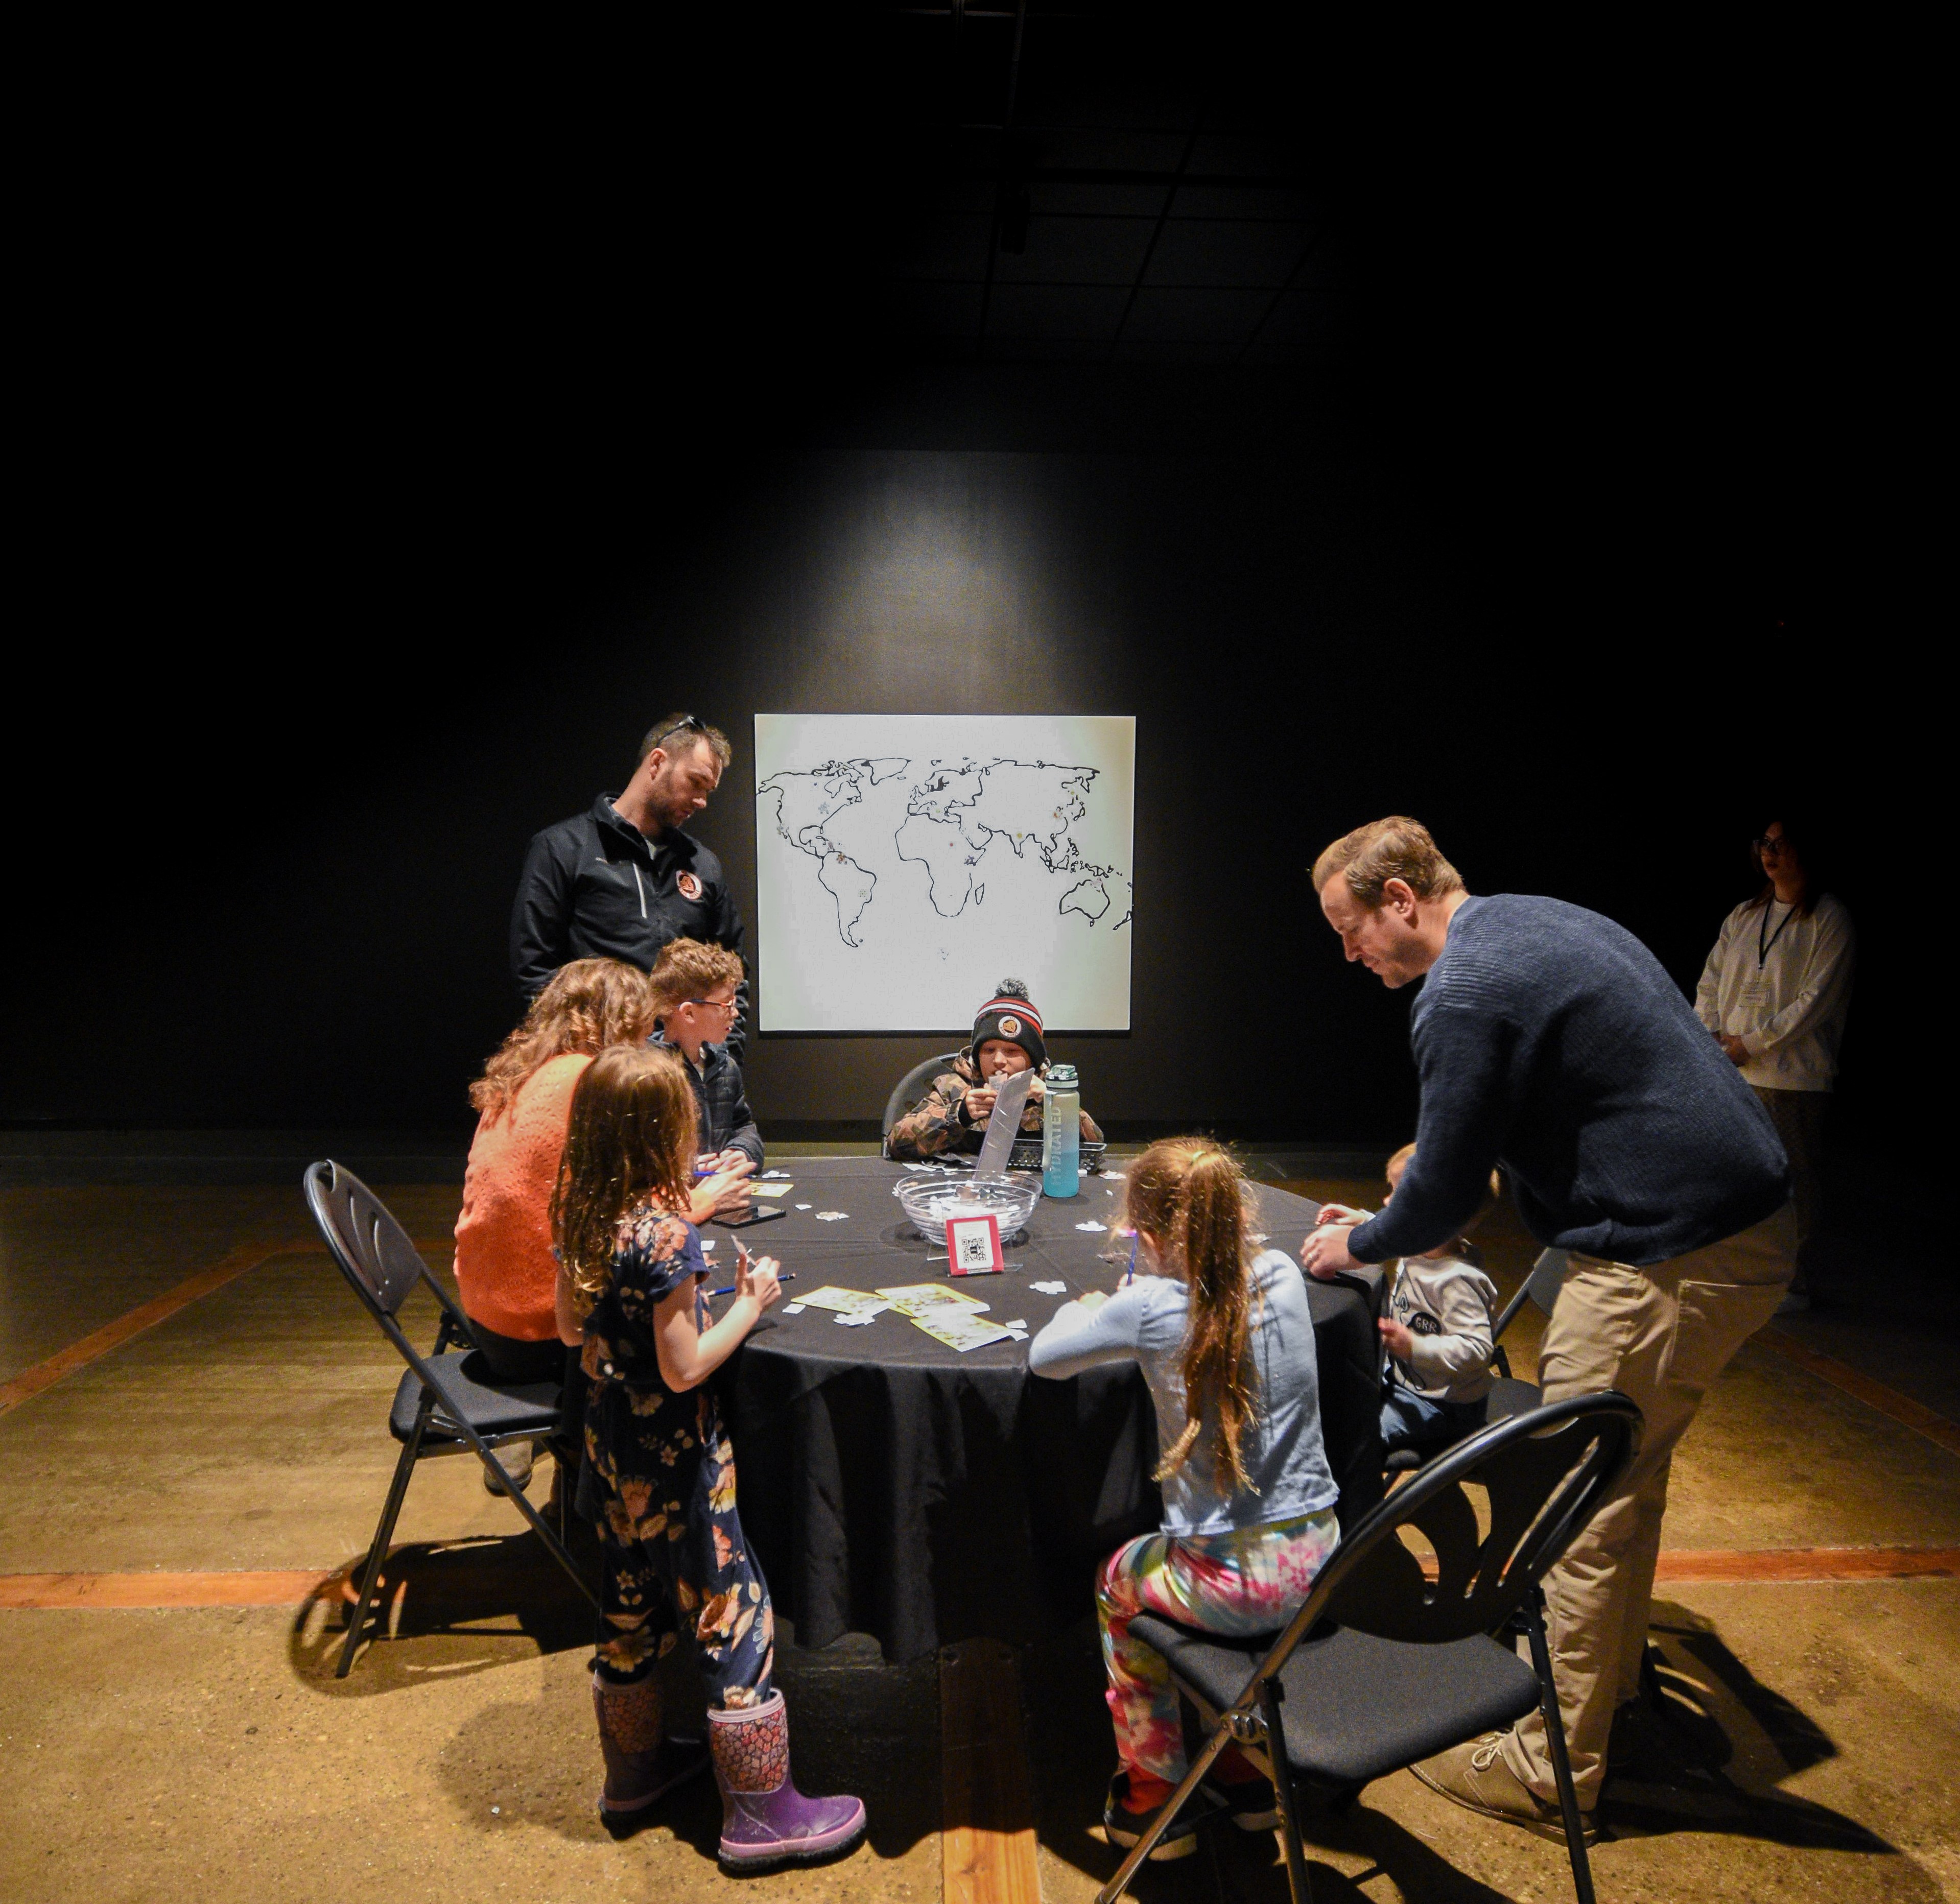 A family sitting around a table in a black room with a outline of the world map on the wall.